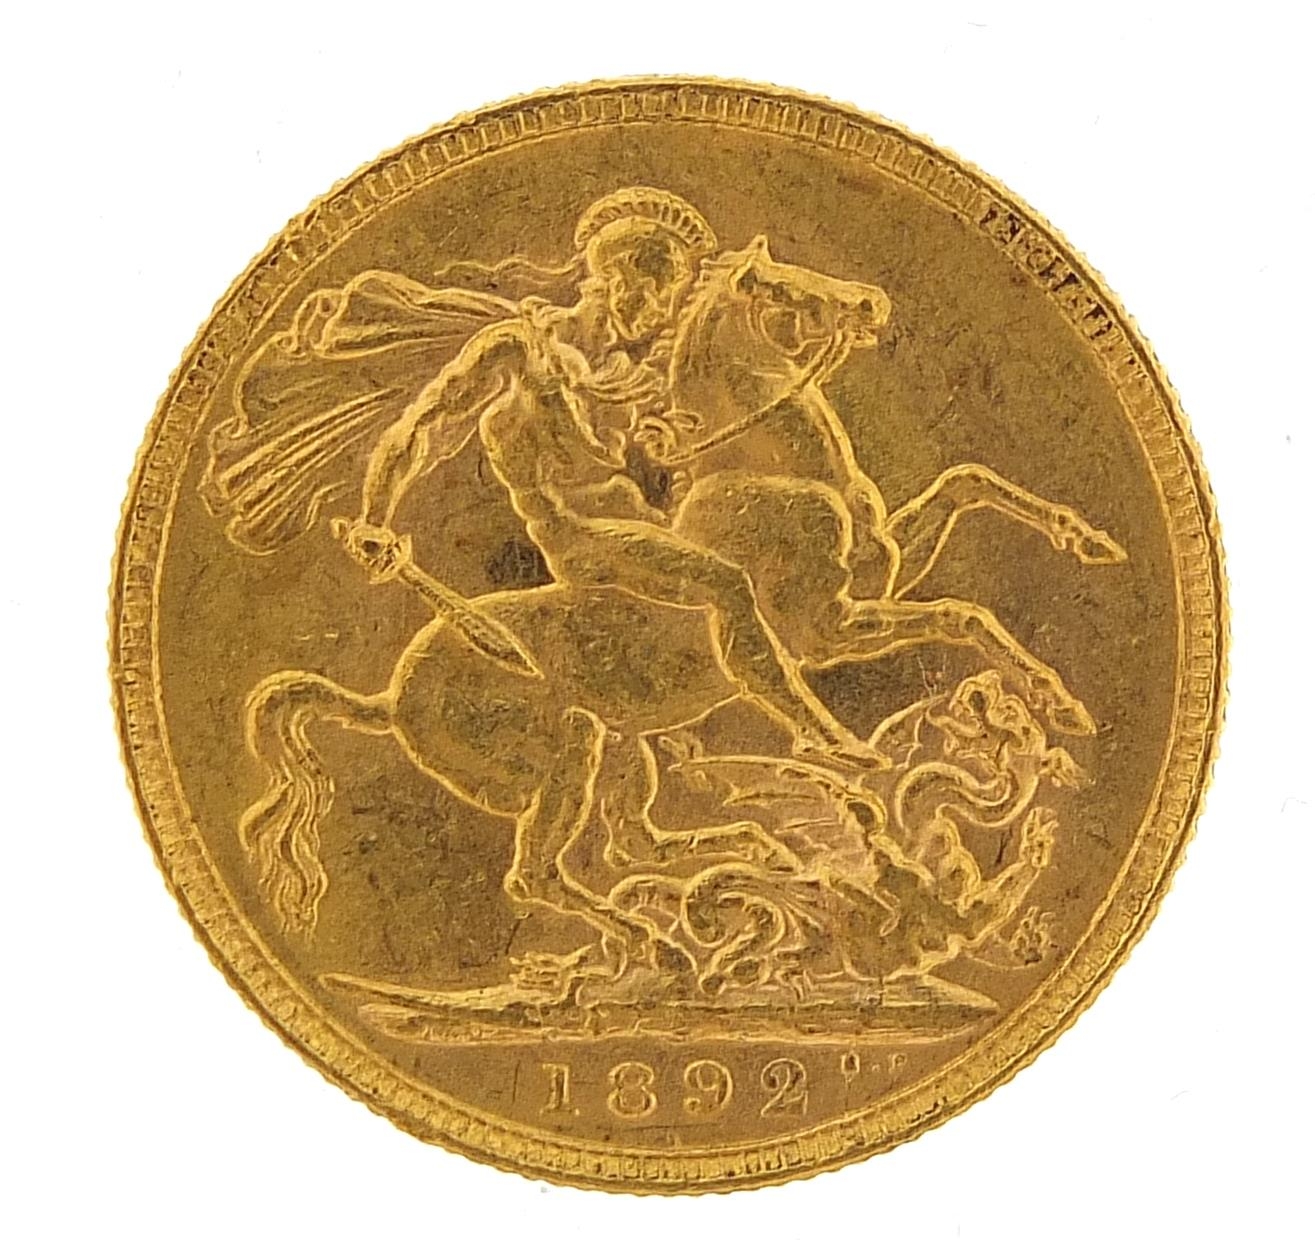 Queen Victoria Jubilee Head 1892 gold sovereign - this lot is sold without buyer?s premium, the